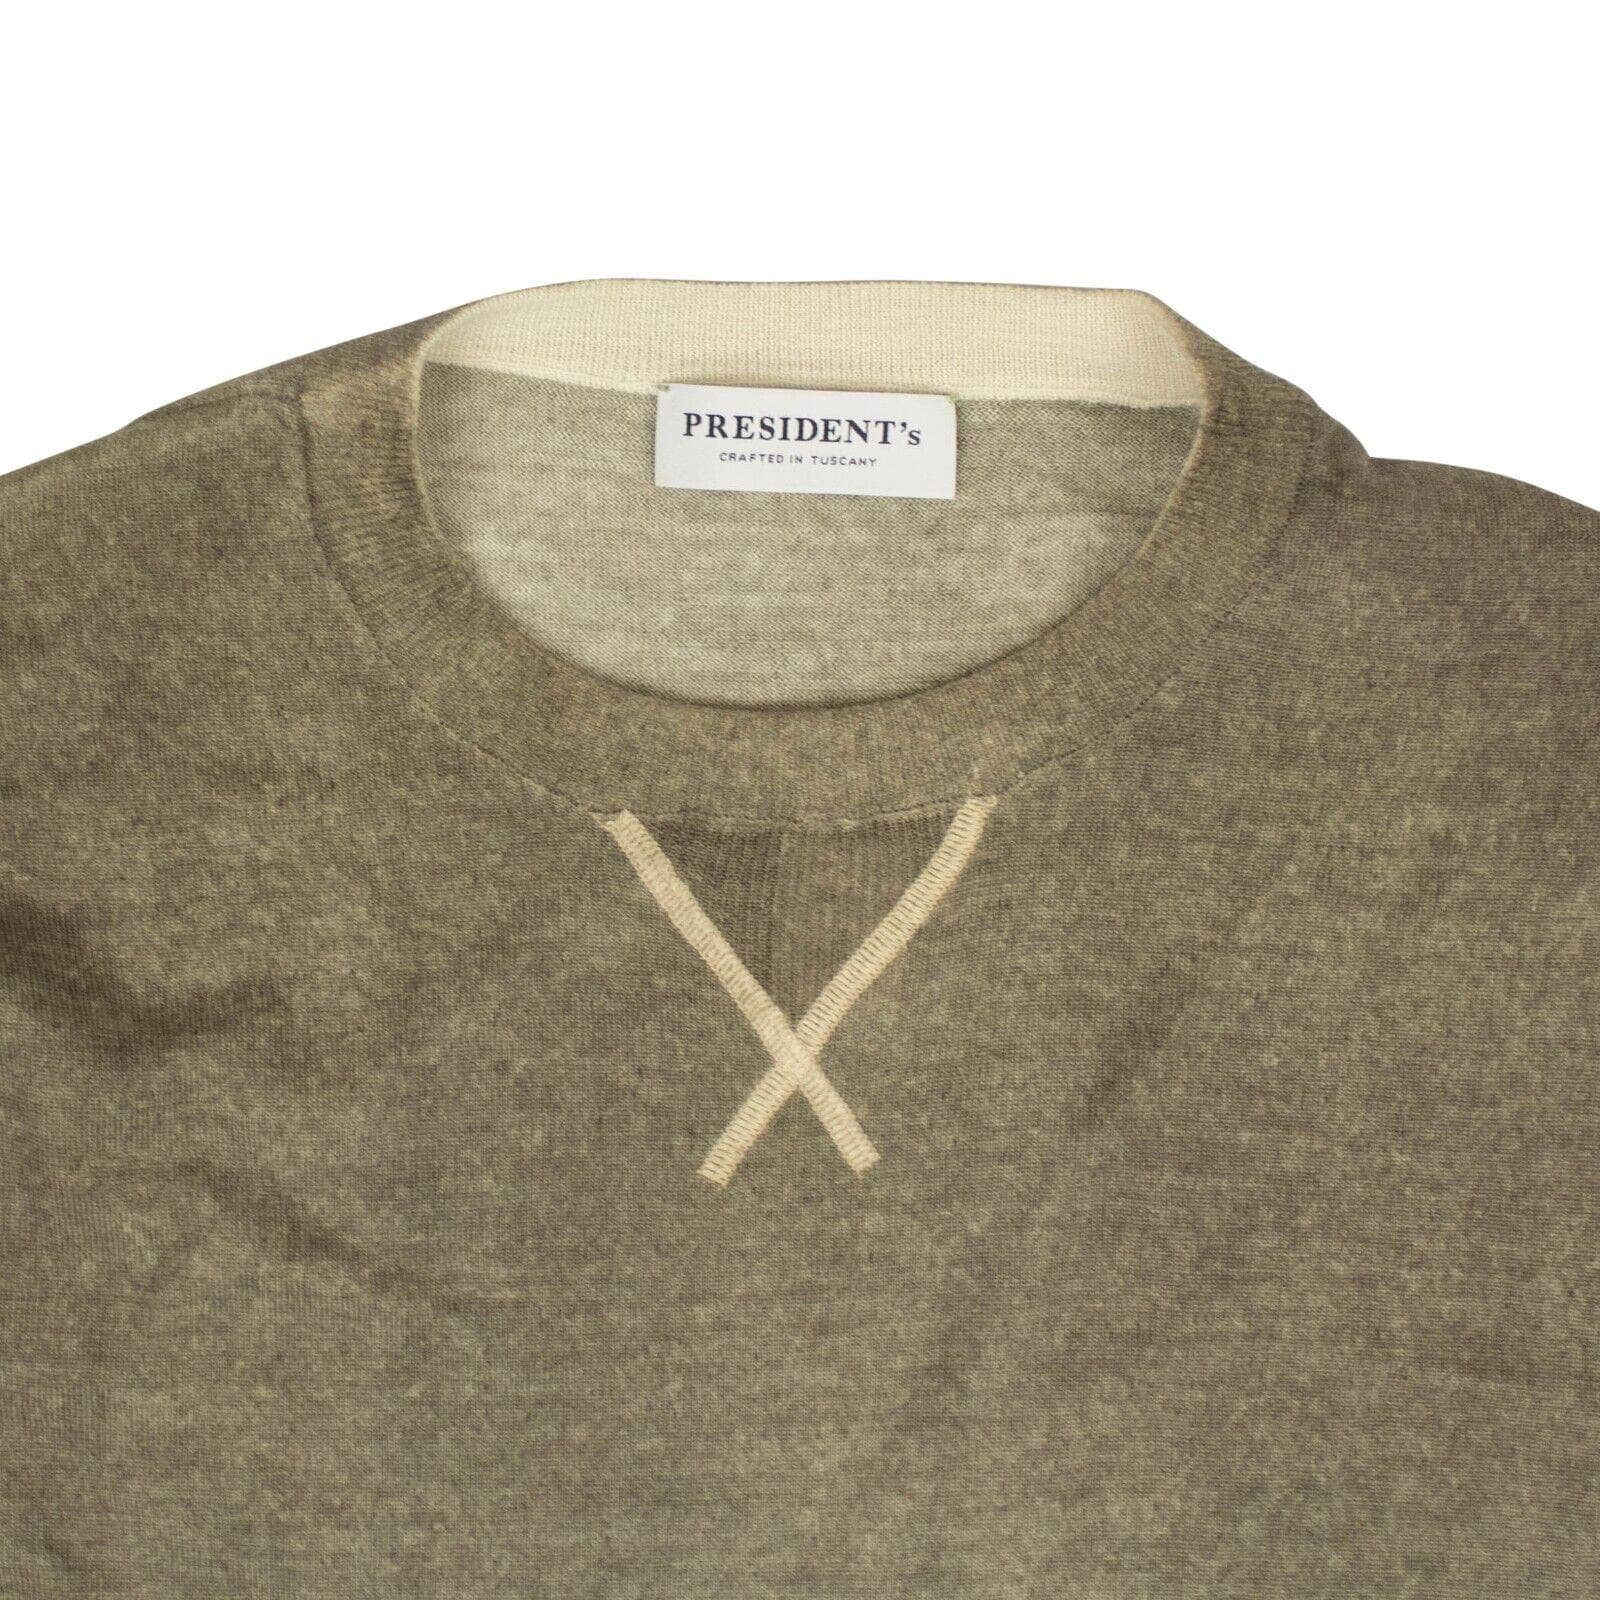 President's channelenable-all, chicmi, couponcollection, gender-mens, main-clothing, mens-cashmere-sweaters, mens-shoes, presidents, size-l, size-xl, size-xxl, under-250 Olive G.16 Wool Cashmere Hand Print Sweater